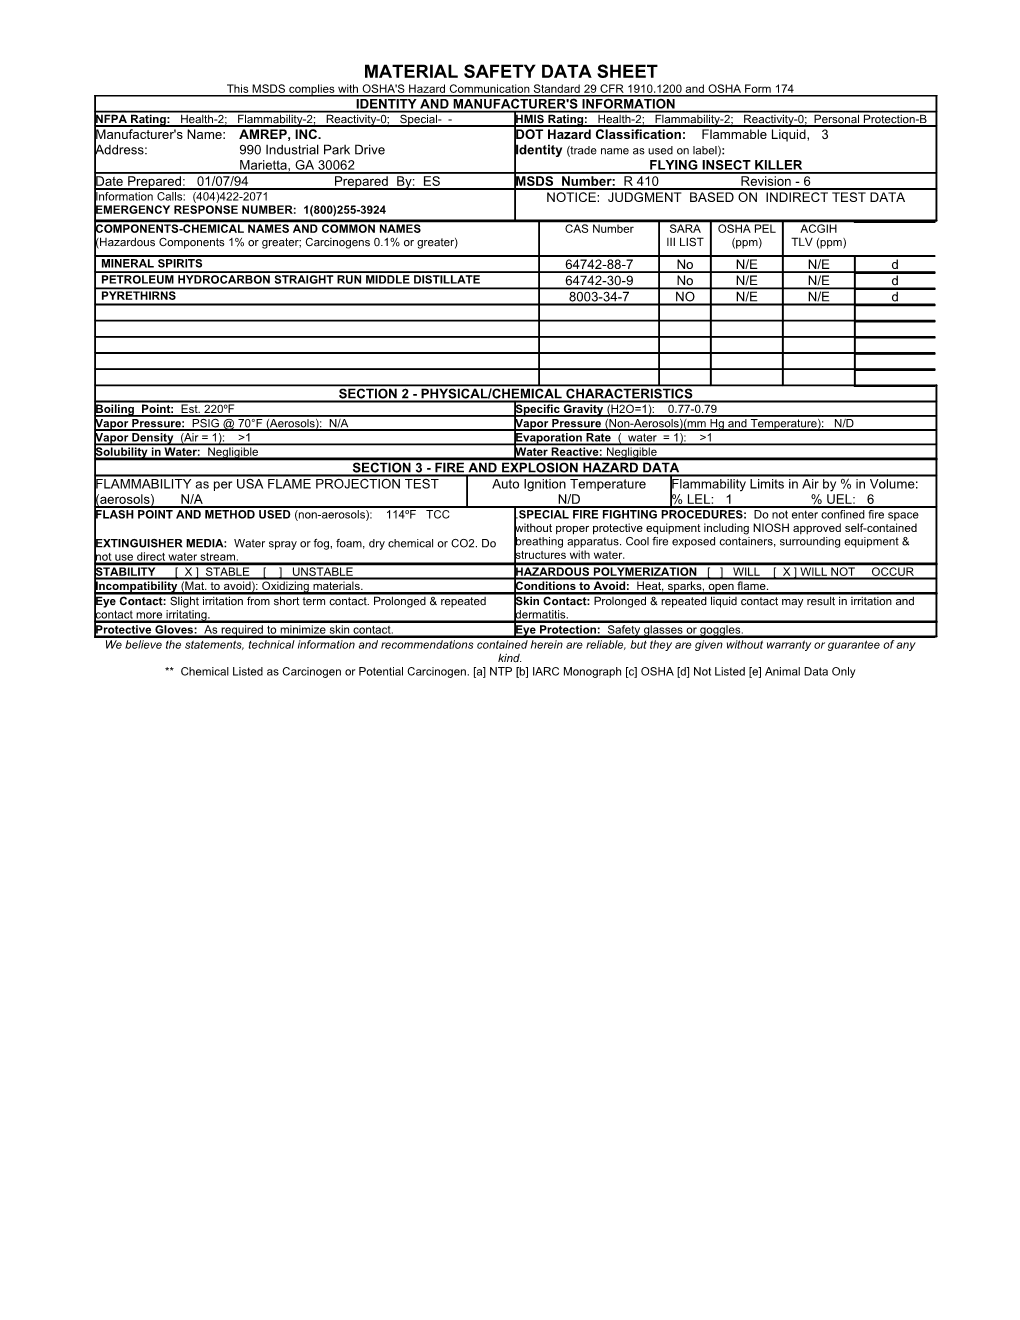 Material Safety Data Sheet s59